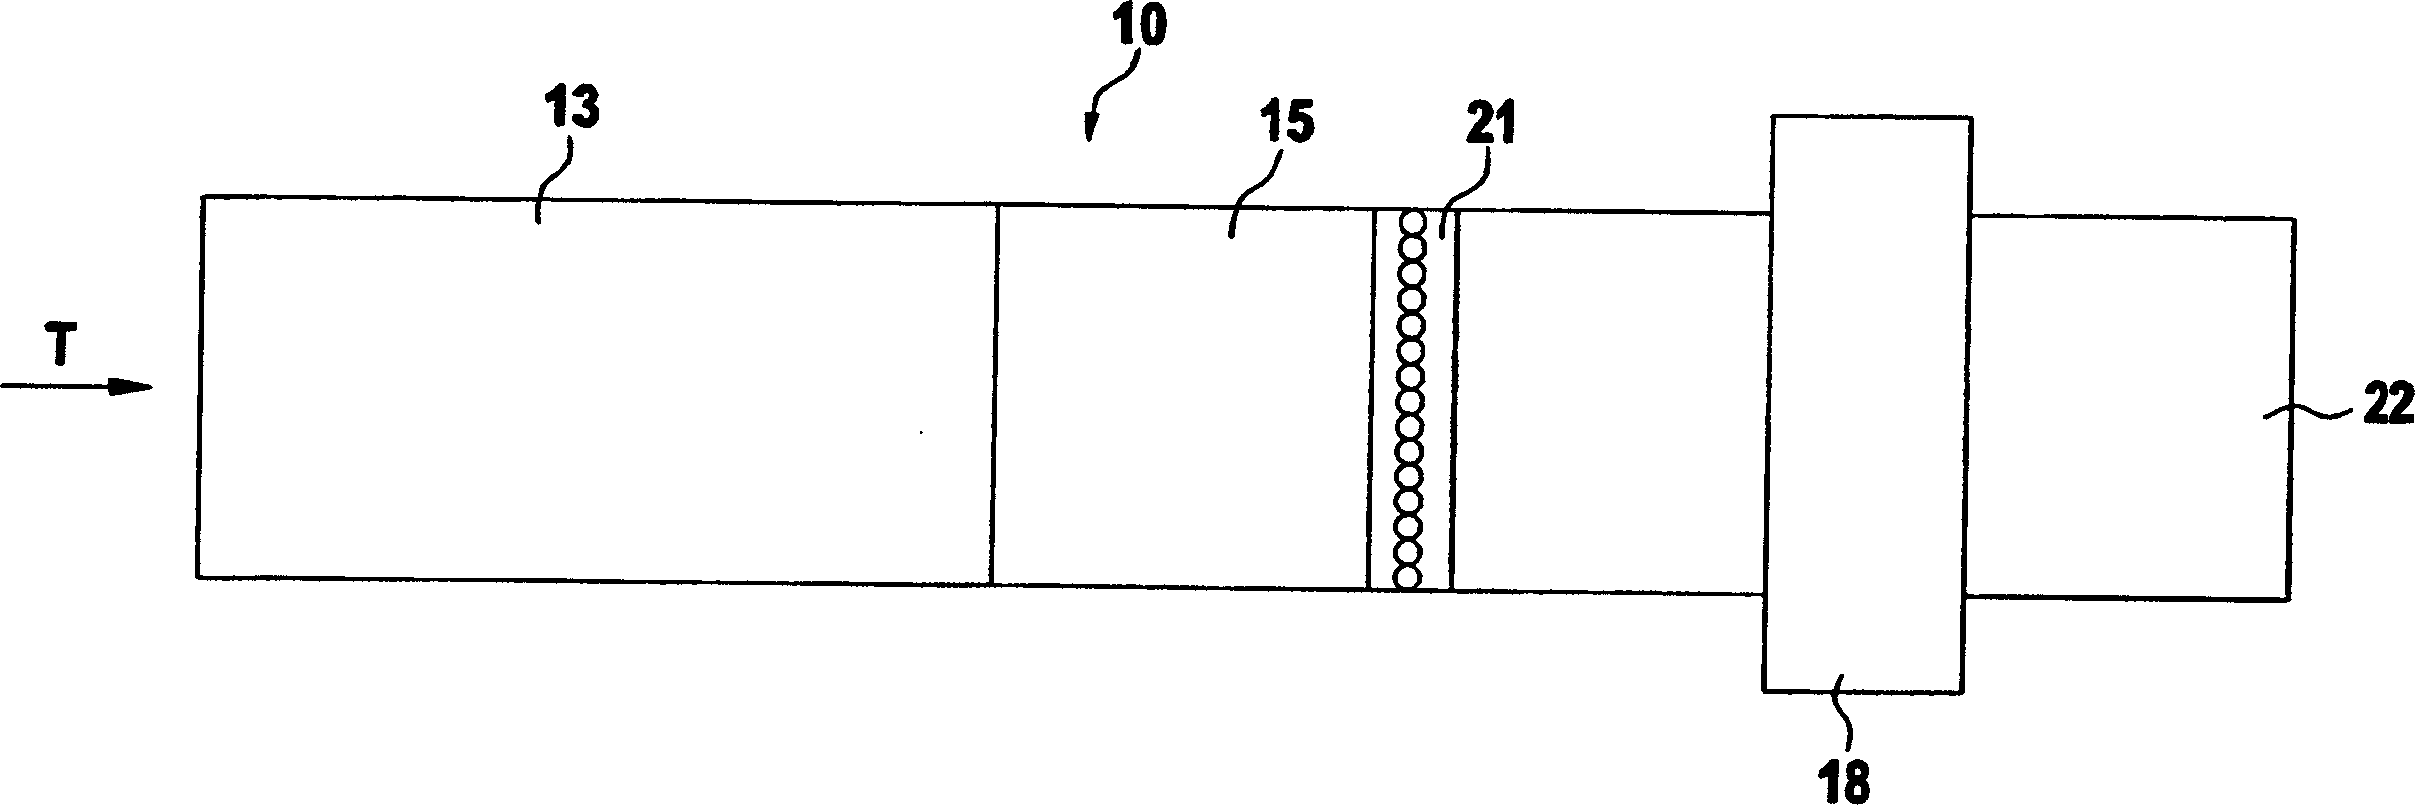 Method and apparatus for removing foreign matter from tobacco to be processed